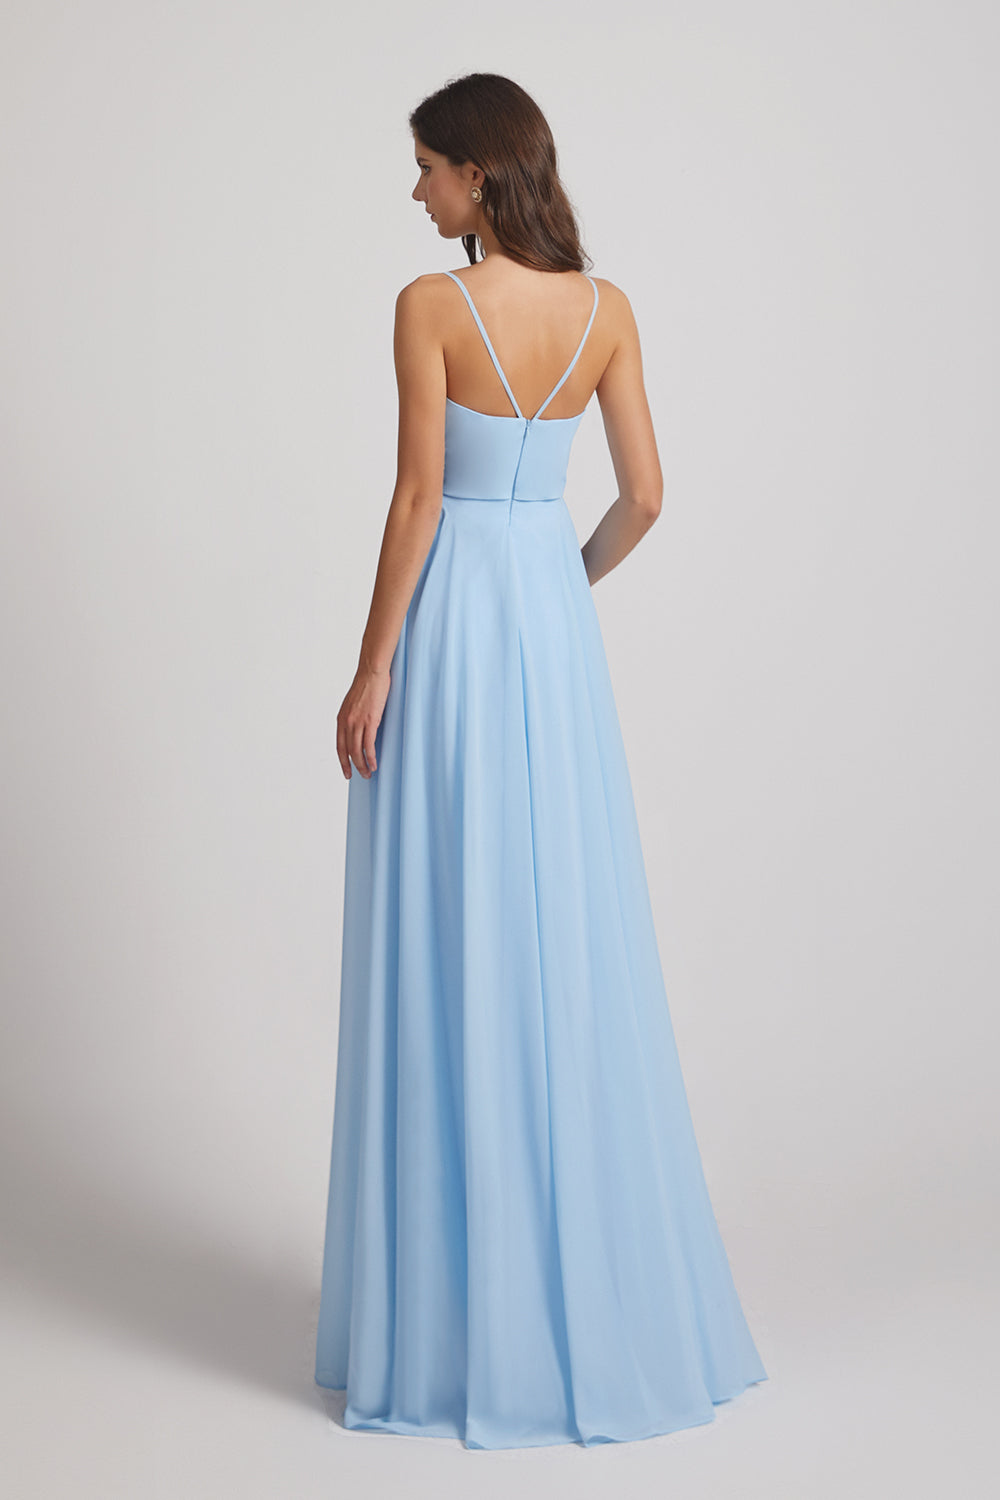 charming sleeveless bridesmaid gowns